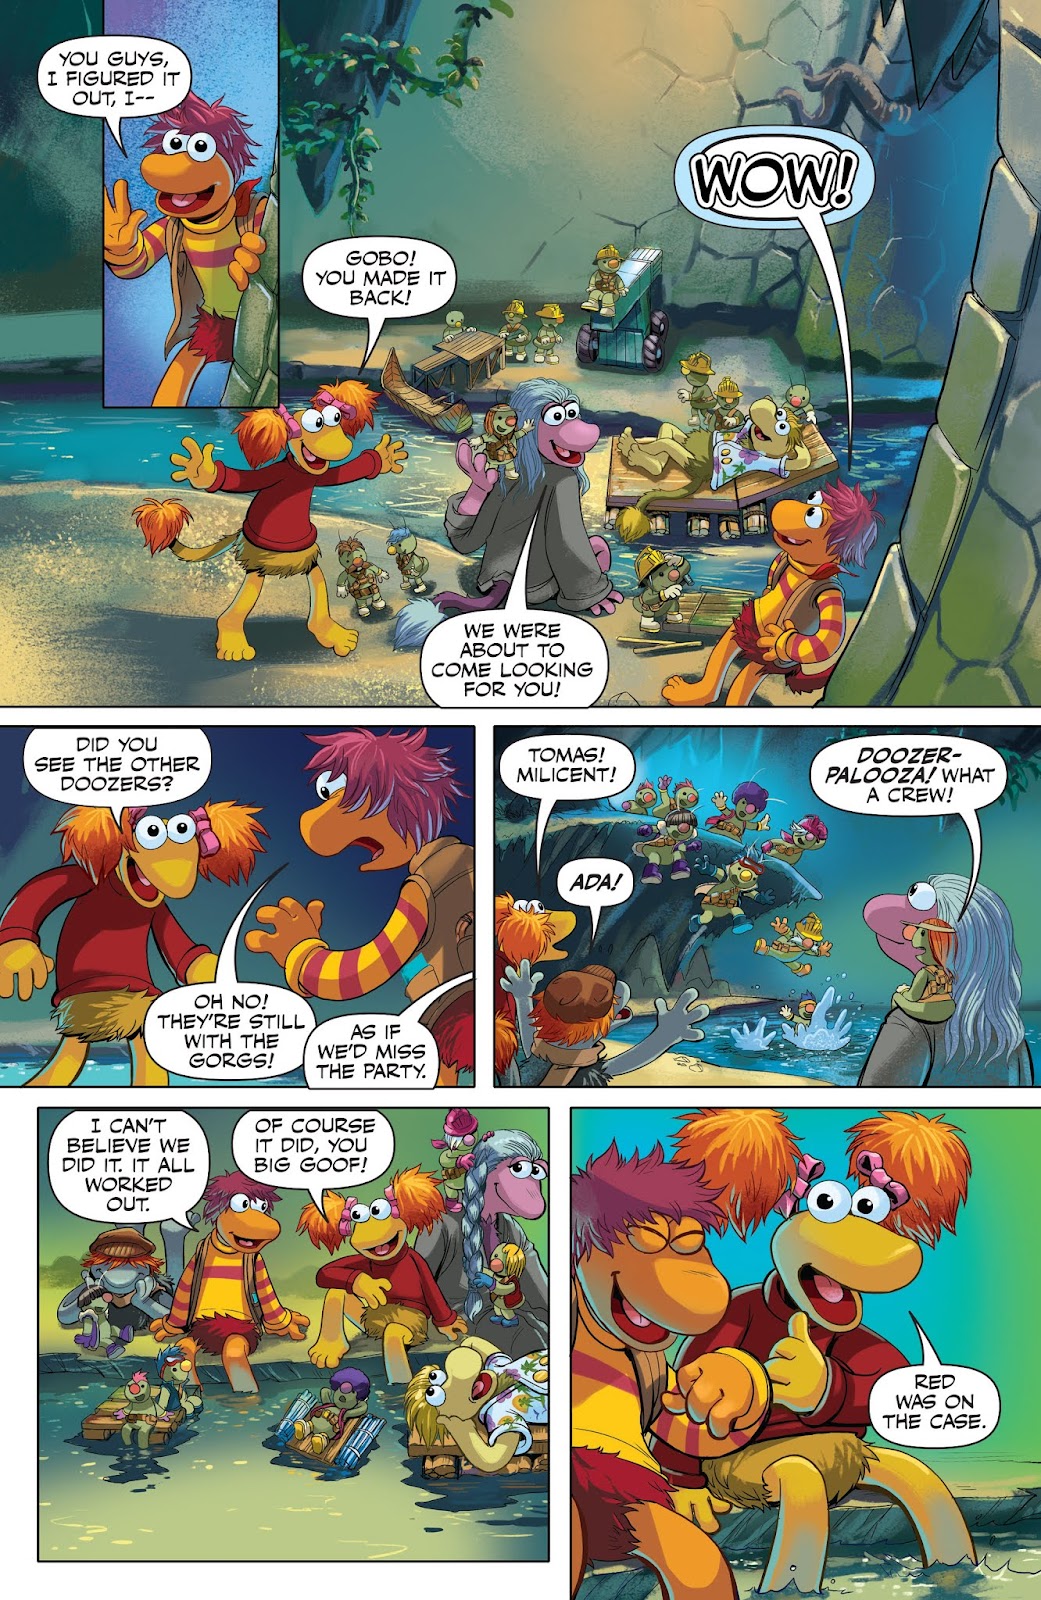 Jim Henson's Fraggle Rock: Journey to the Everspring issue 4 - Page 20